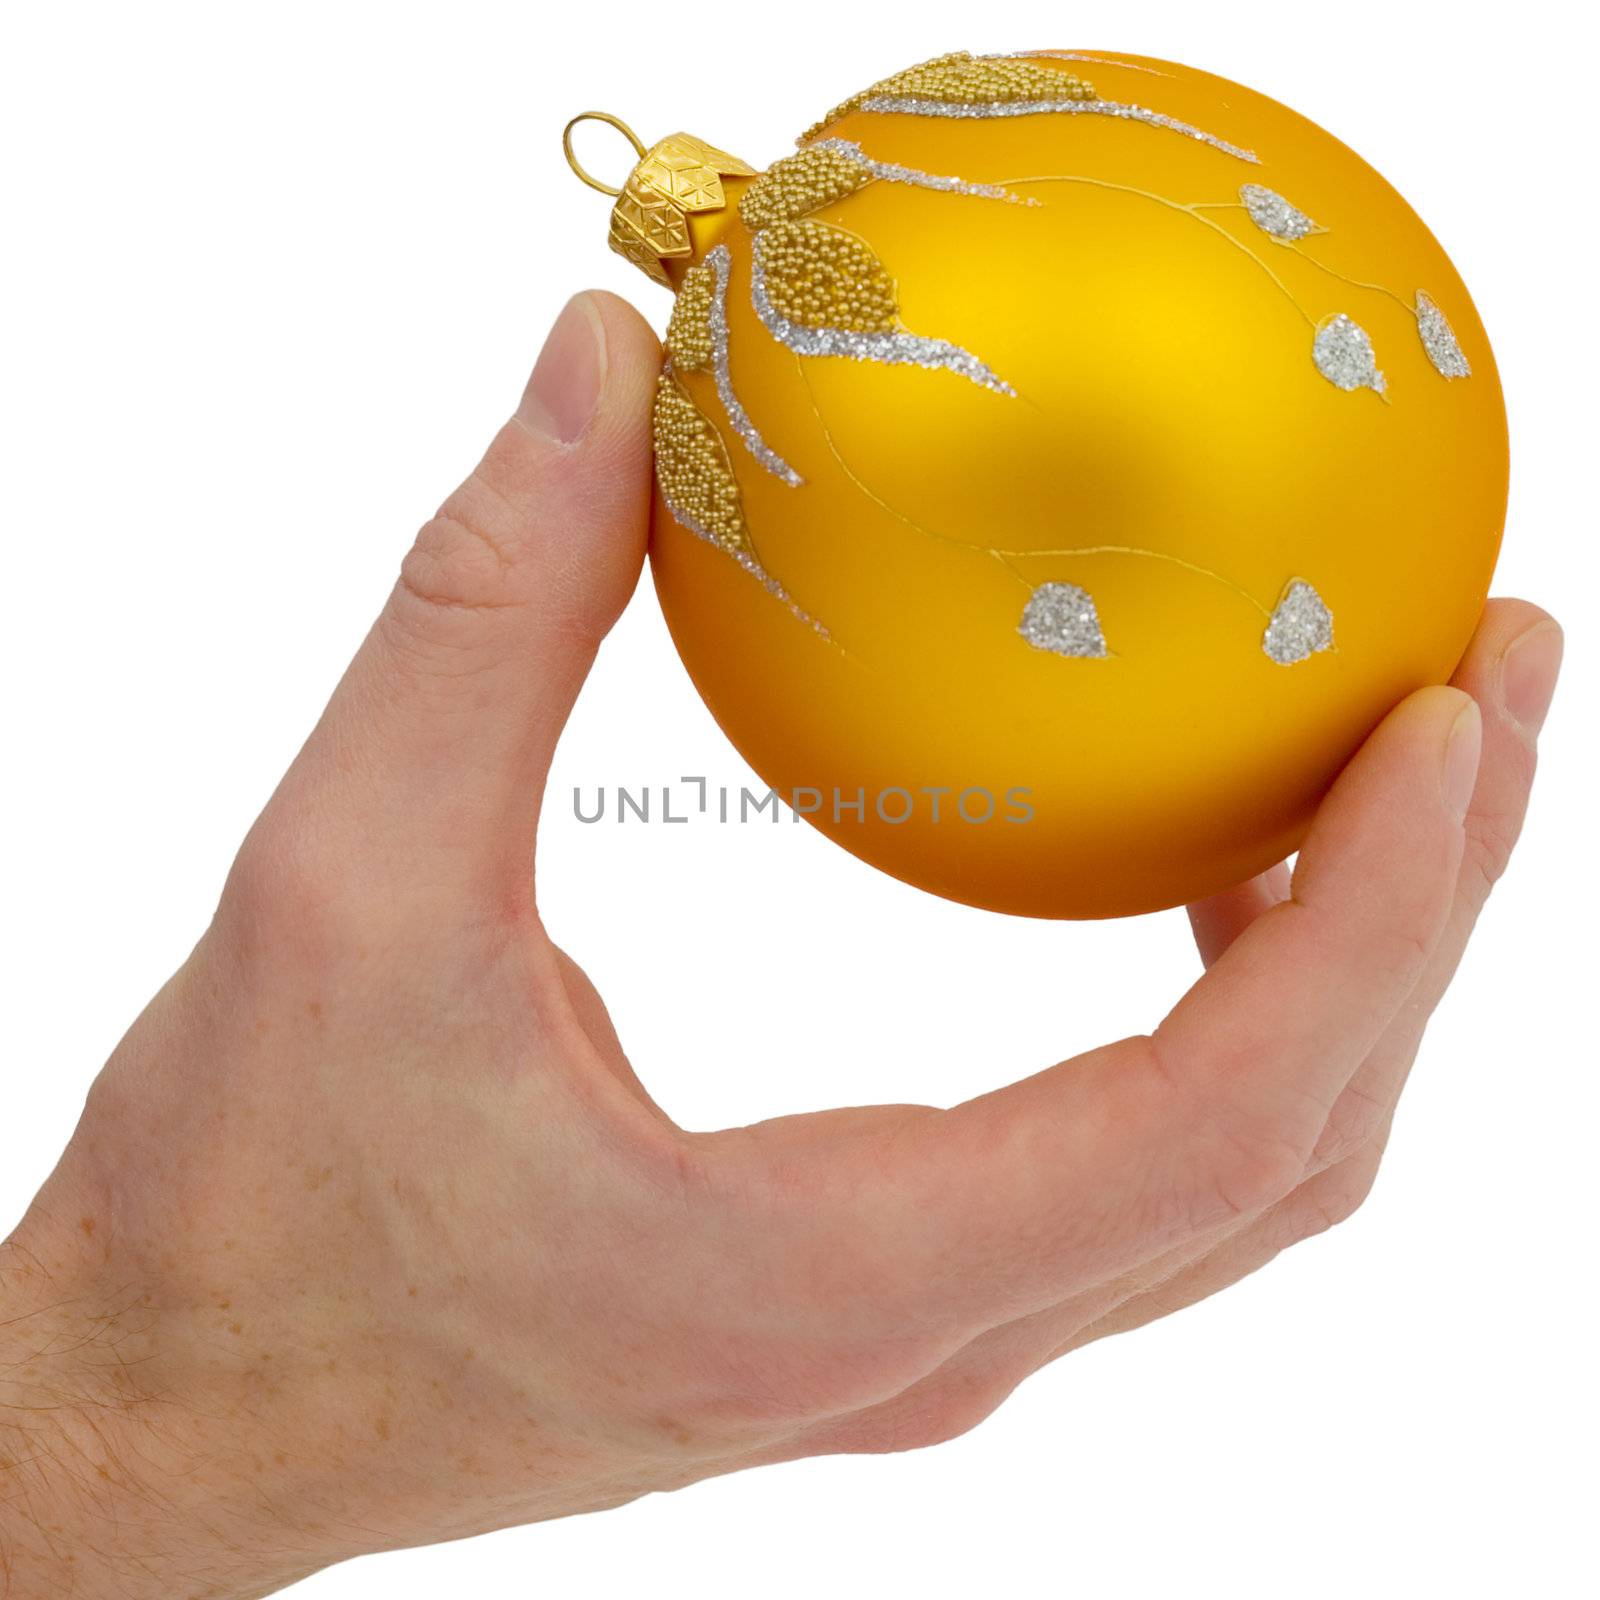 Cristmas-tree golden ball in the hand on the white background